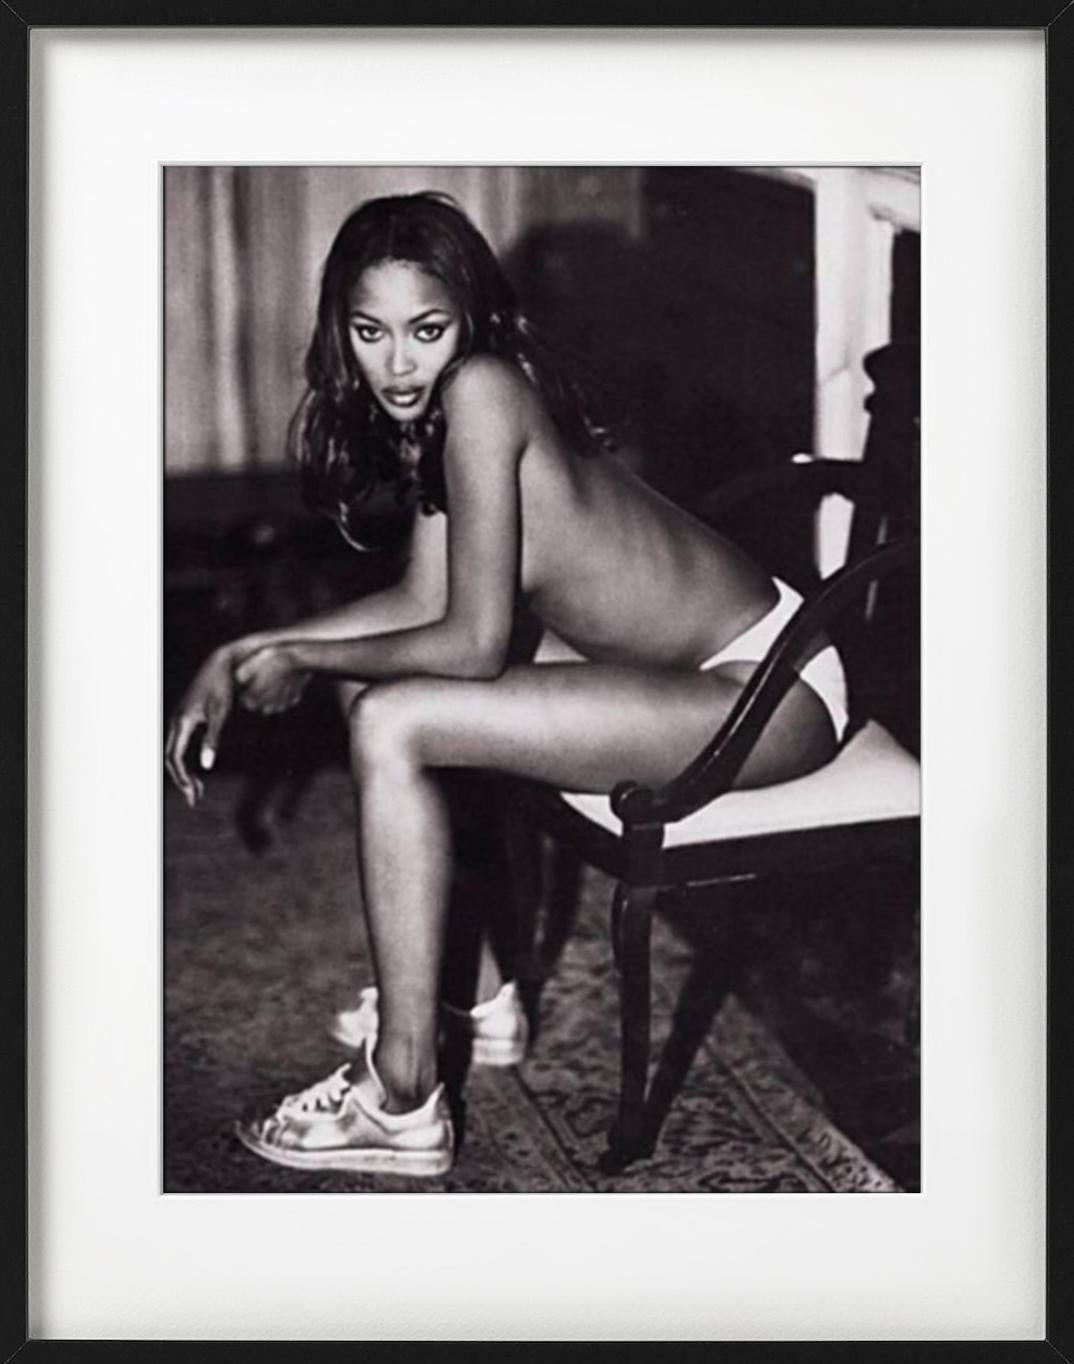 'Naomi Campbell' - the nude Supermodel in Sneakers, fine art photography, 1994 - Contemporary Photograph by Ellen von Unwerth